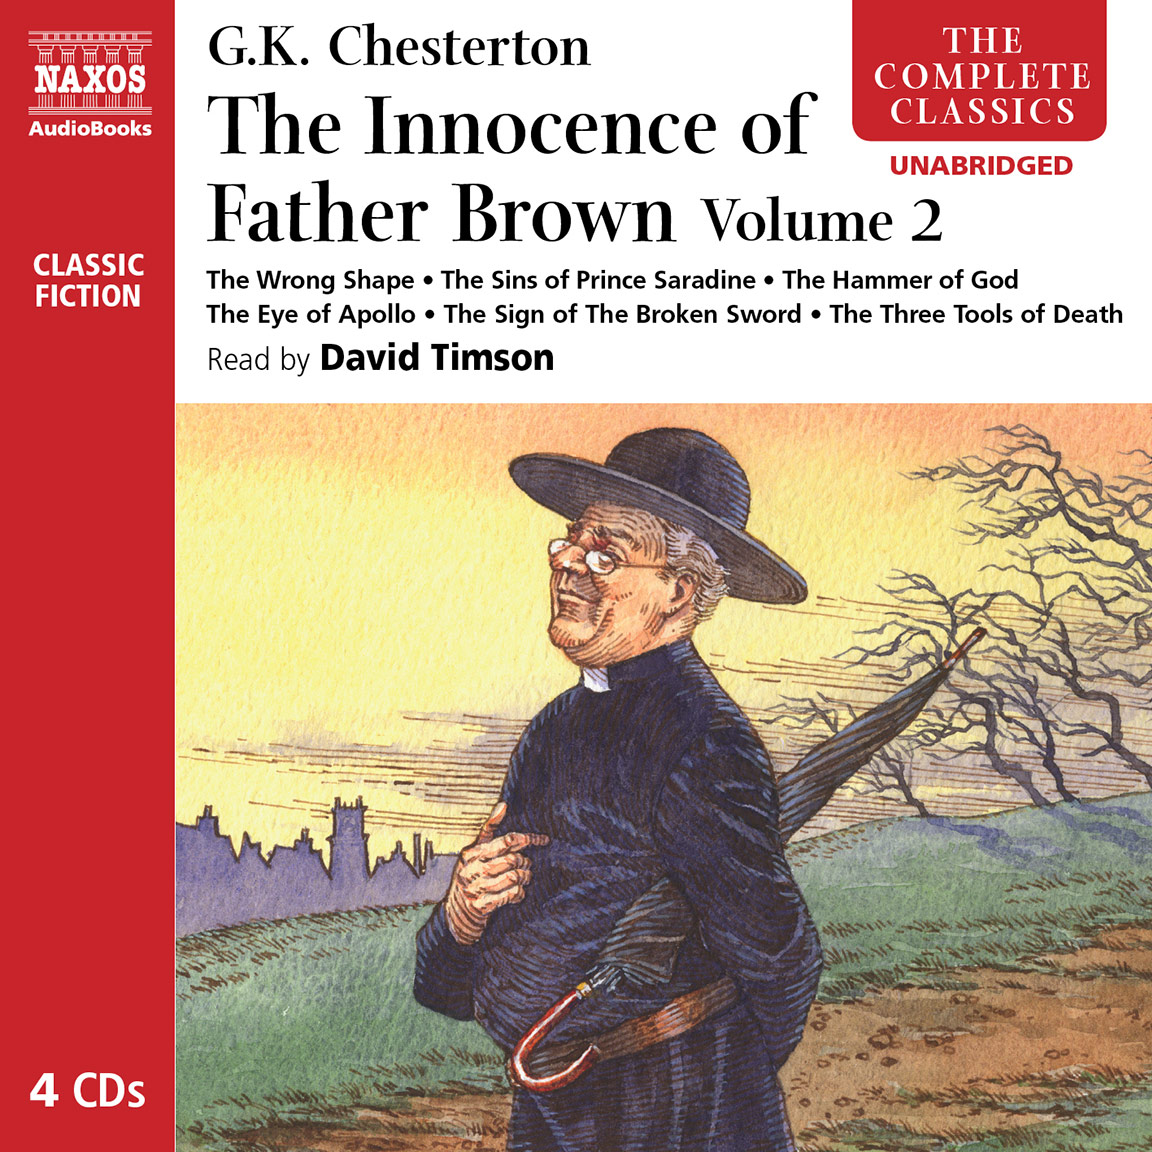 Farmer s father save the innocence. The Innocence of father Brown. Chesterton father Brown. Честертон отец Браун. The Innocence of father Brown by g. k. Chesterton первое издание.